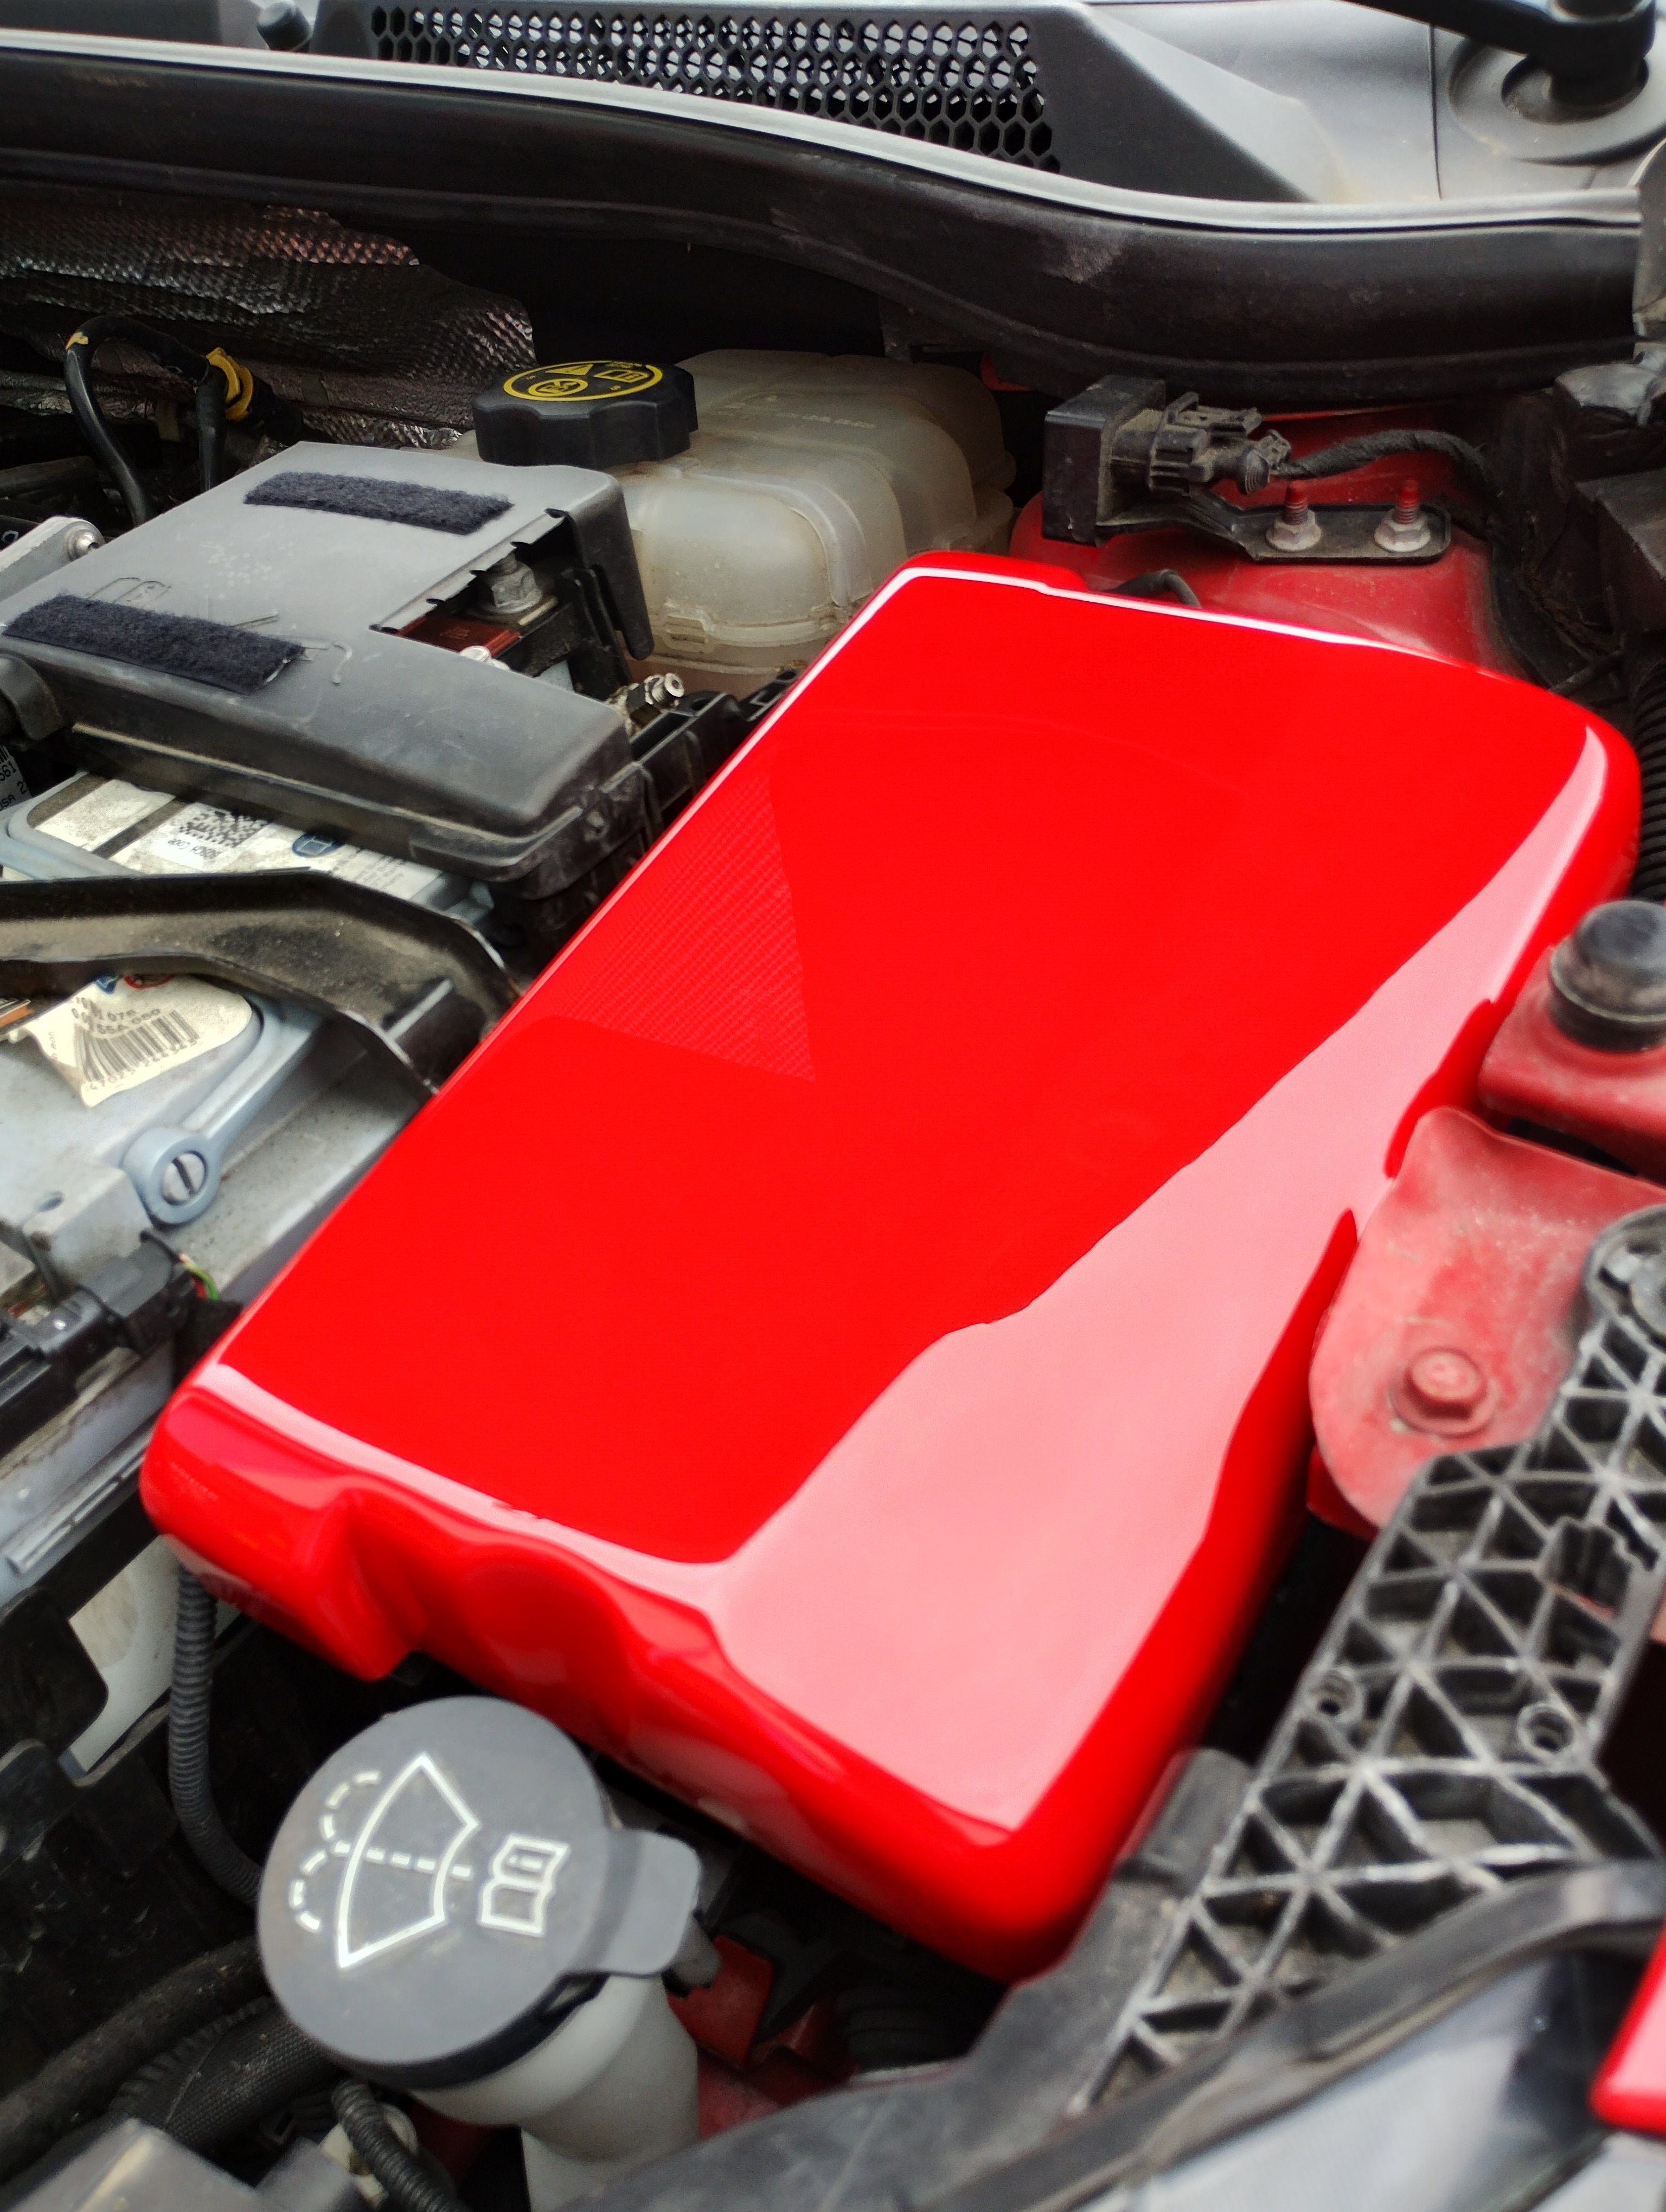 Proform Fuse Box Cover - Vauxhall / Opel Astra J VXR (Plastic Finishes)